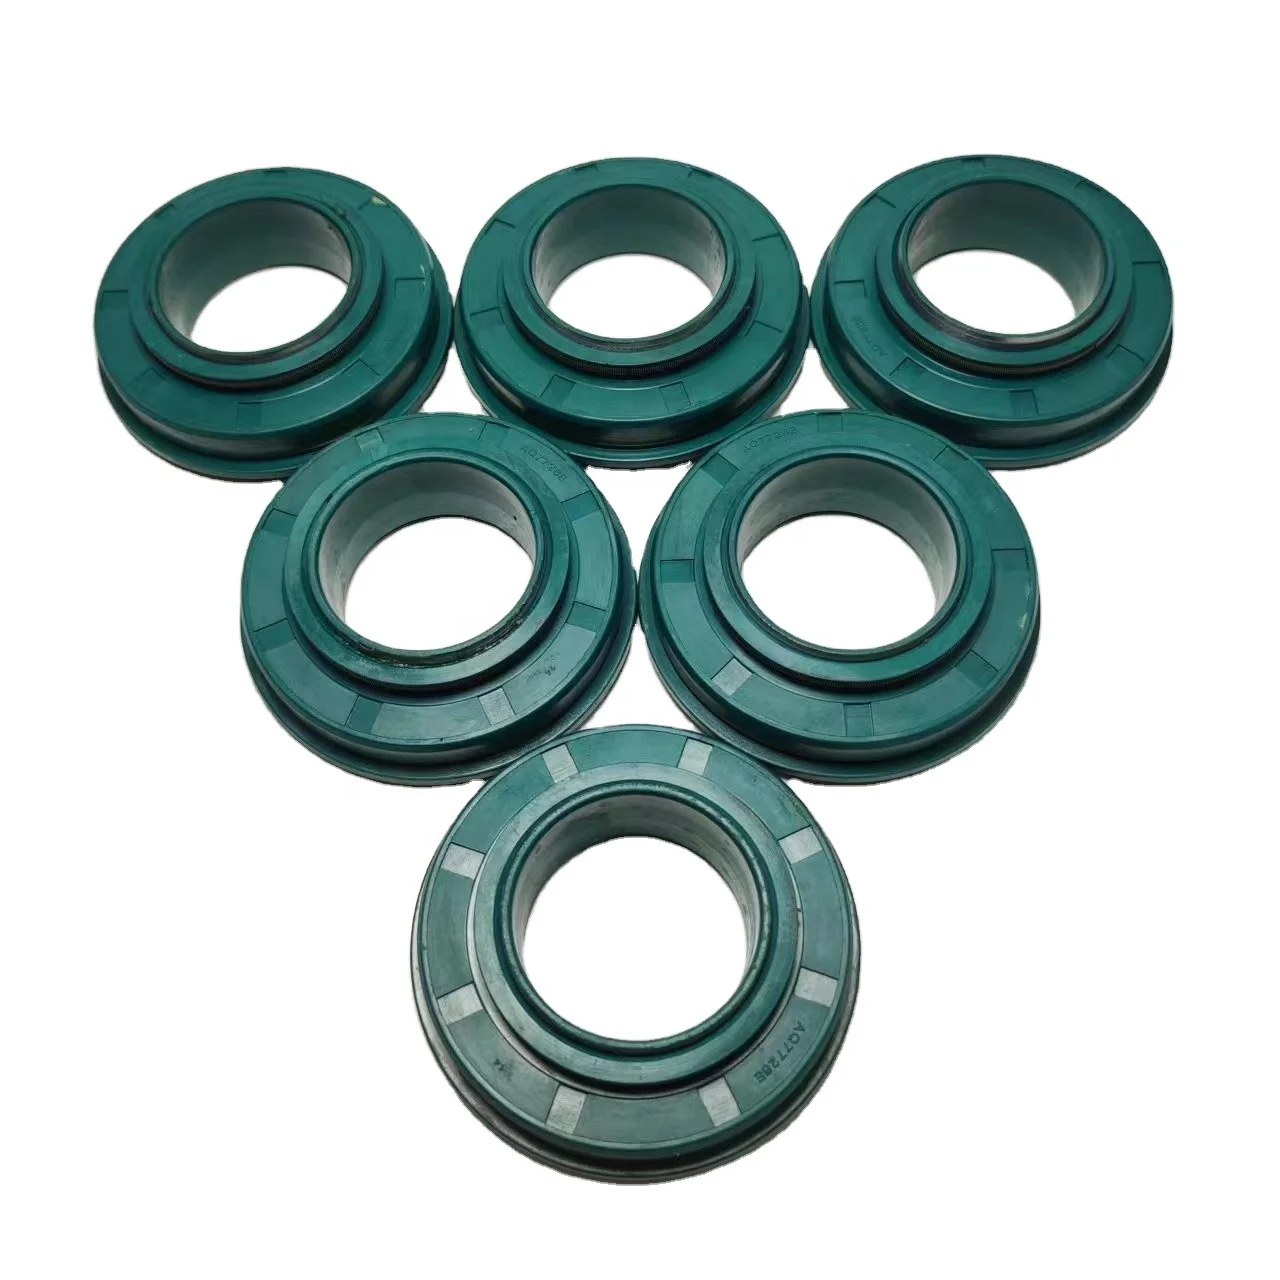 66613-32340 Suitable For Kubota Harvester Accessory Combination Oil Seal  Aq7726e/35 * 65 * 12 - Buy Oil Seal,Nbr Oil Seal,Farm Machinery Parts  Product on Alibaba.com